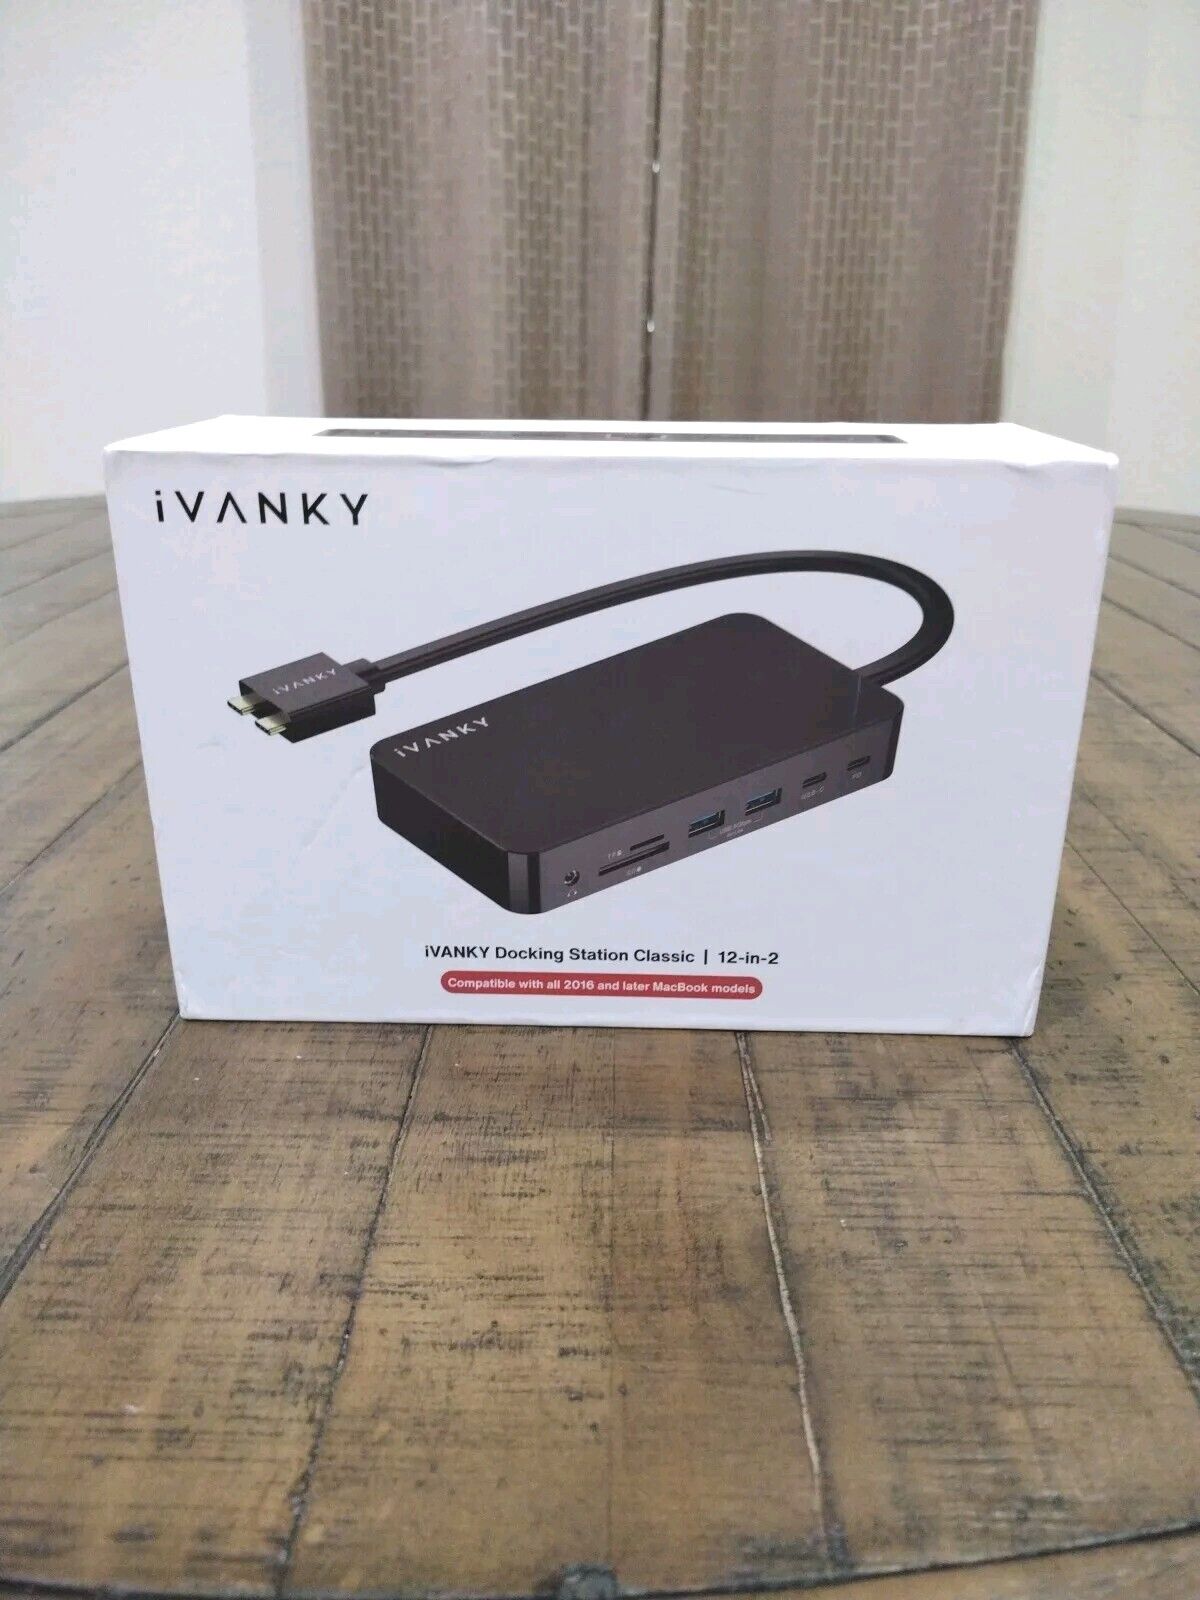 IVANKY Docking Station Classic 12-in-2 4K 30Hz - D4